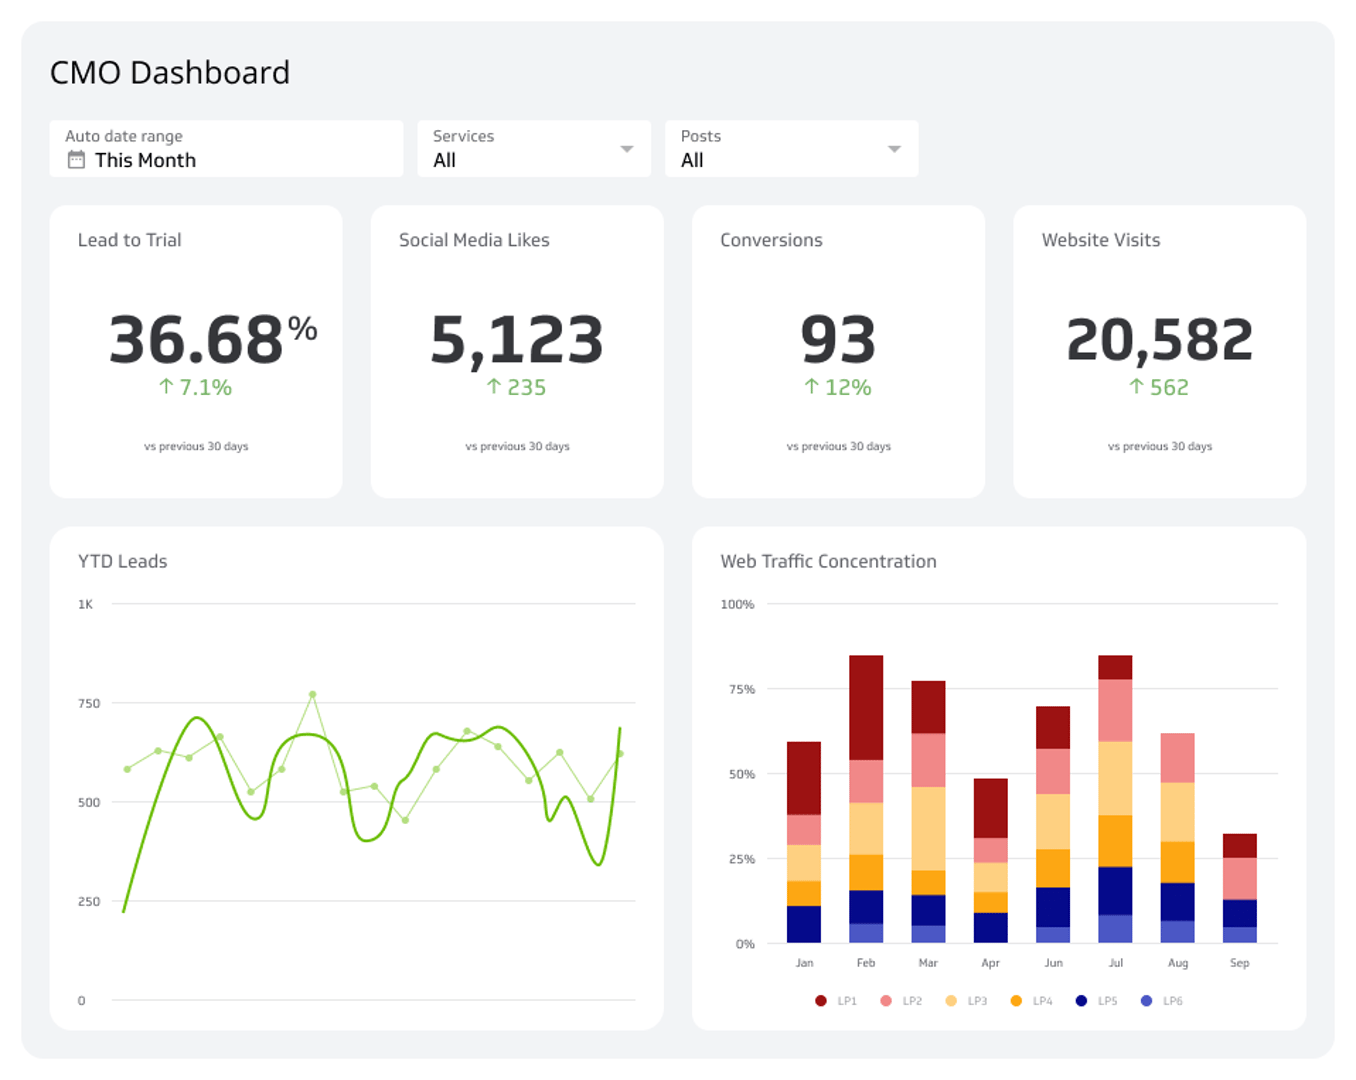 Related Dashboard Examples - CMO Marketing Dashboard